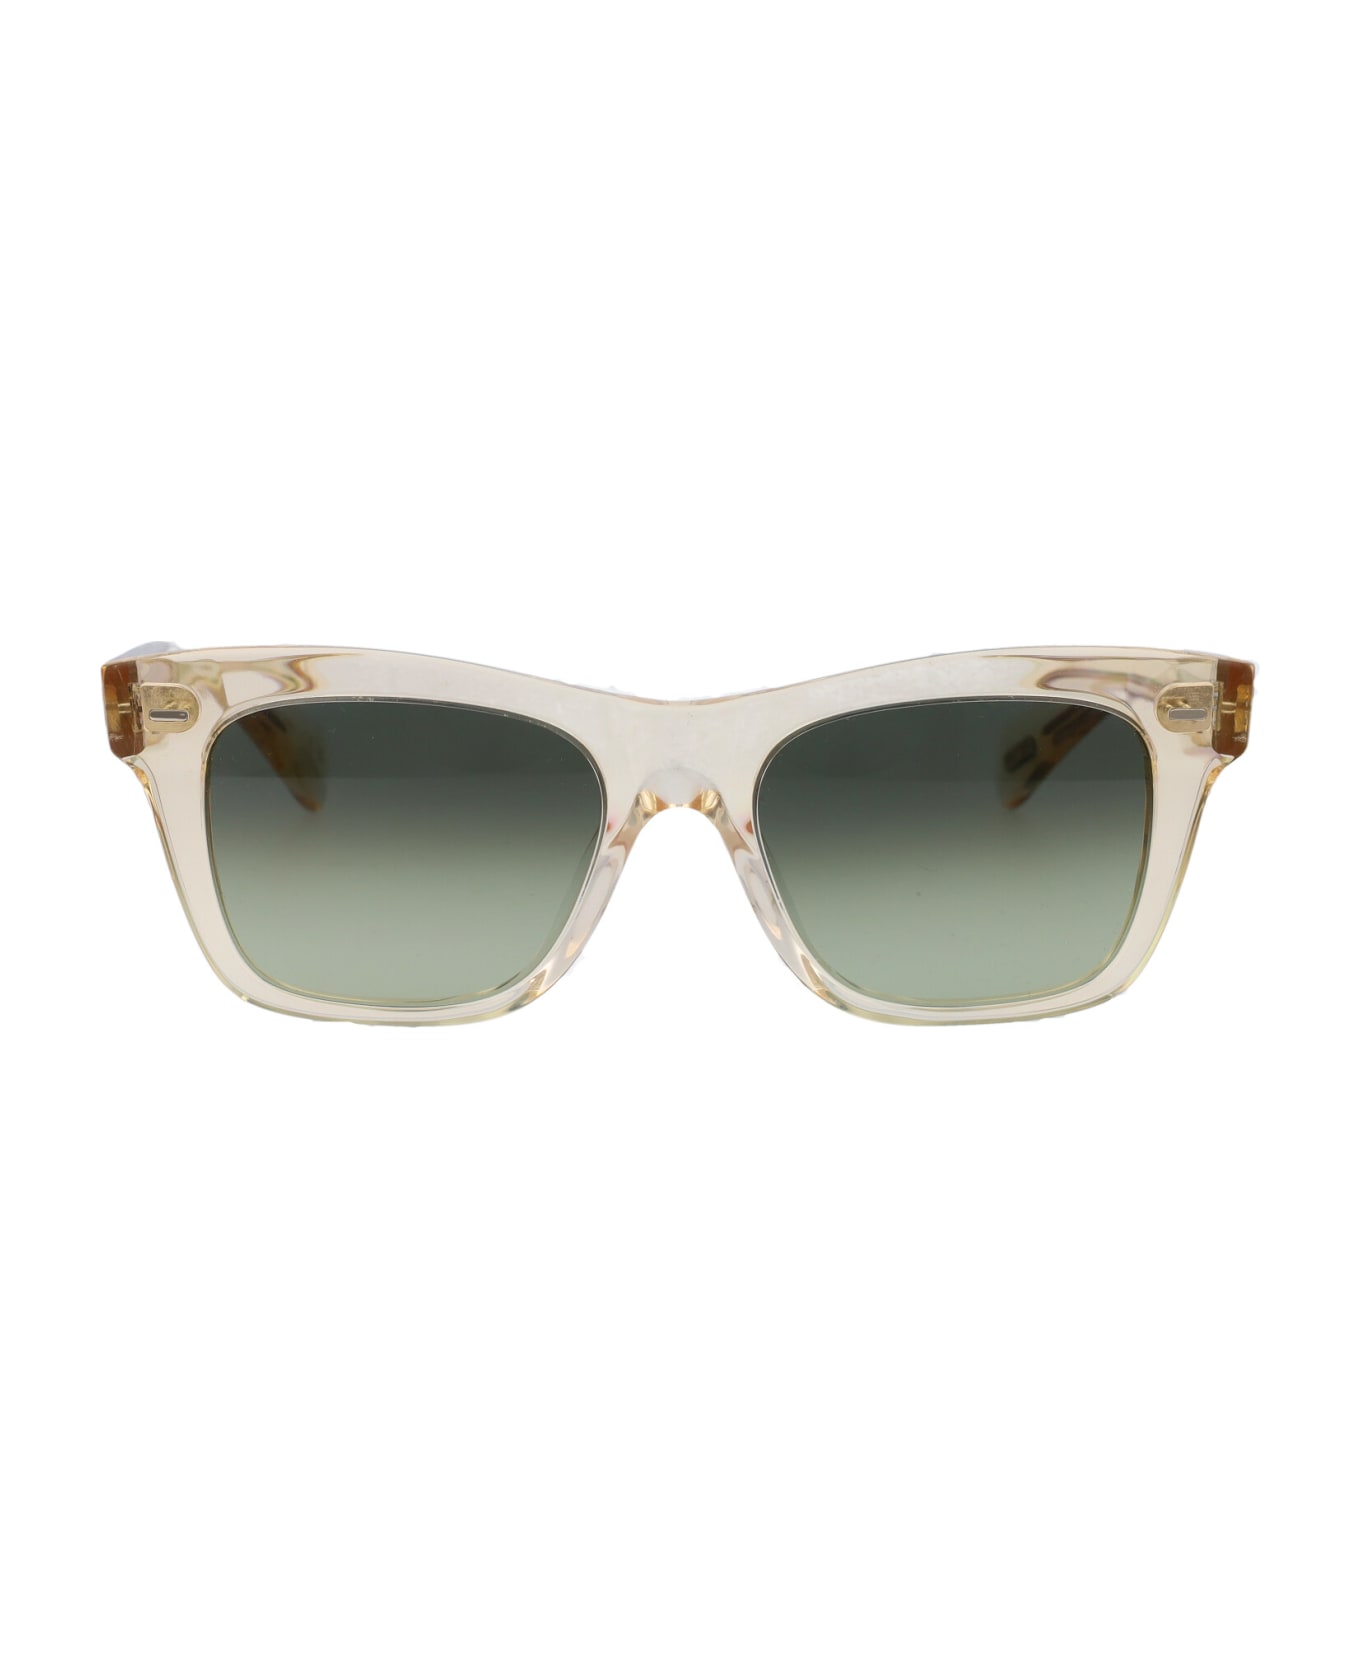 Oliver Peoples Ms. Oliver Sunglasses - 1094BH Buff サングラス